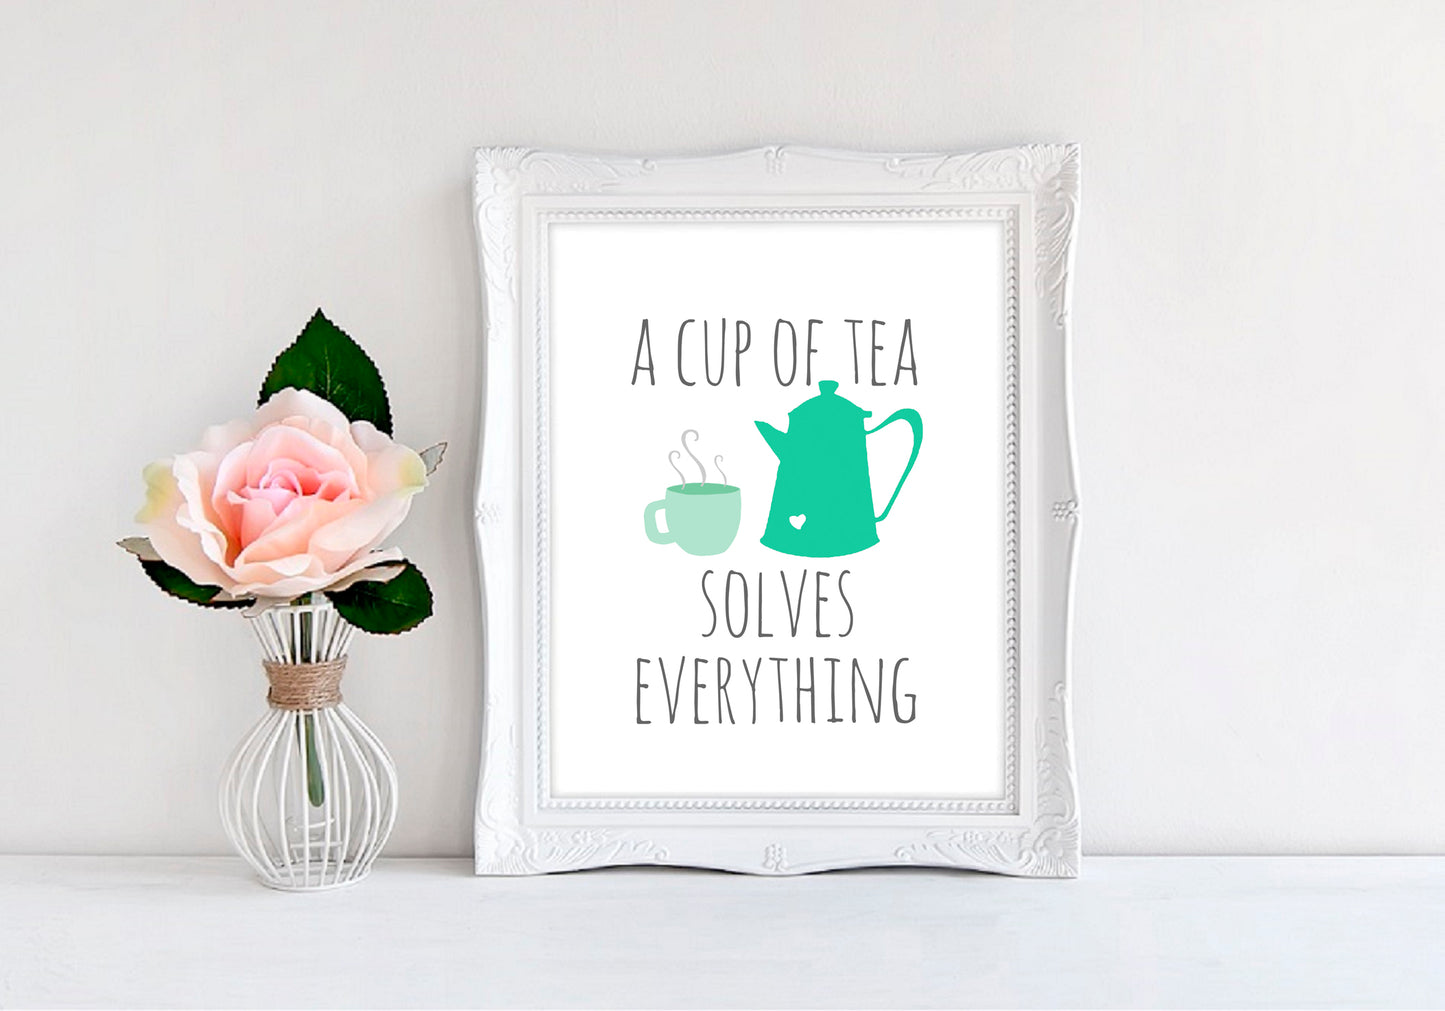 A Cup Of Tea Solves Everything - 8"x10" Wall Print - MoonlightMakers